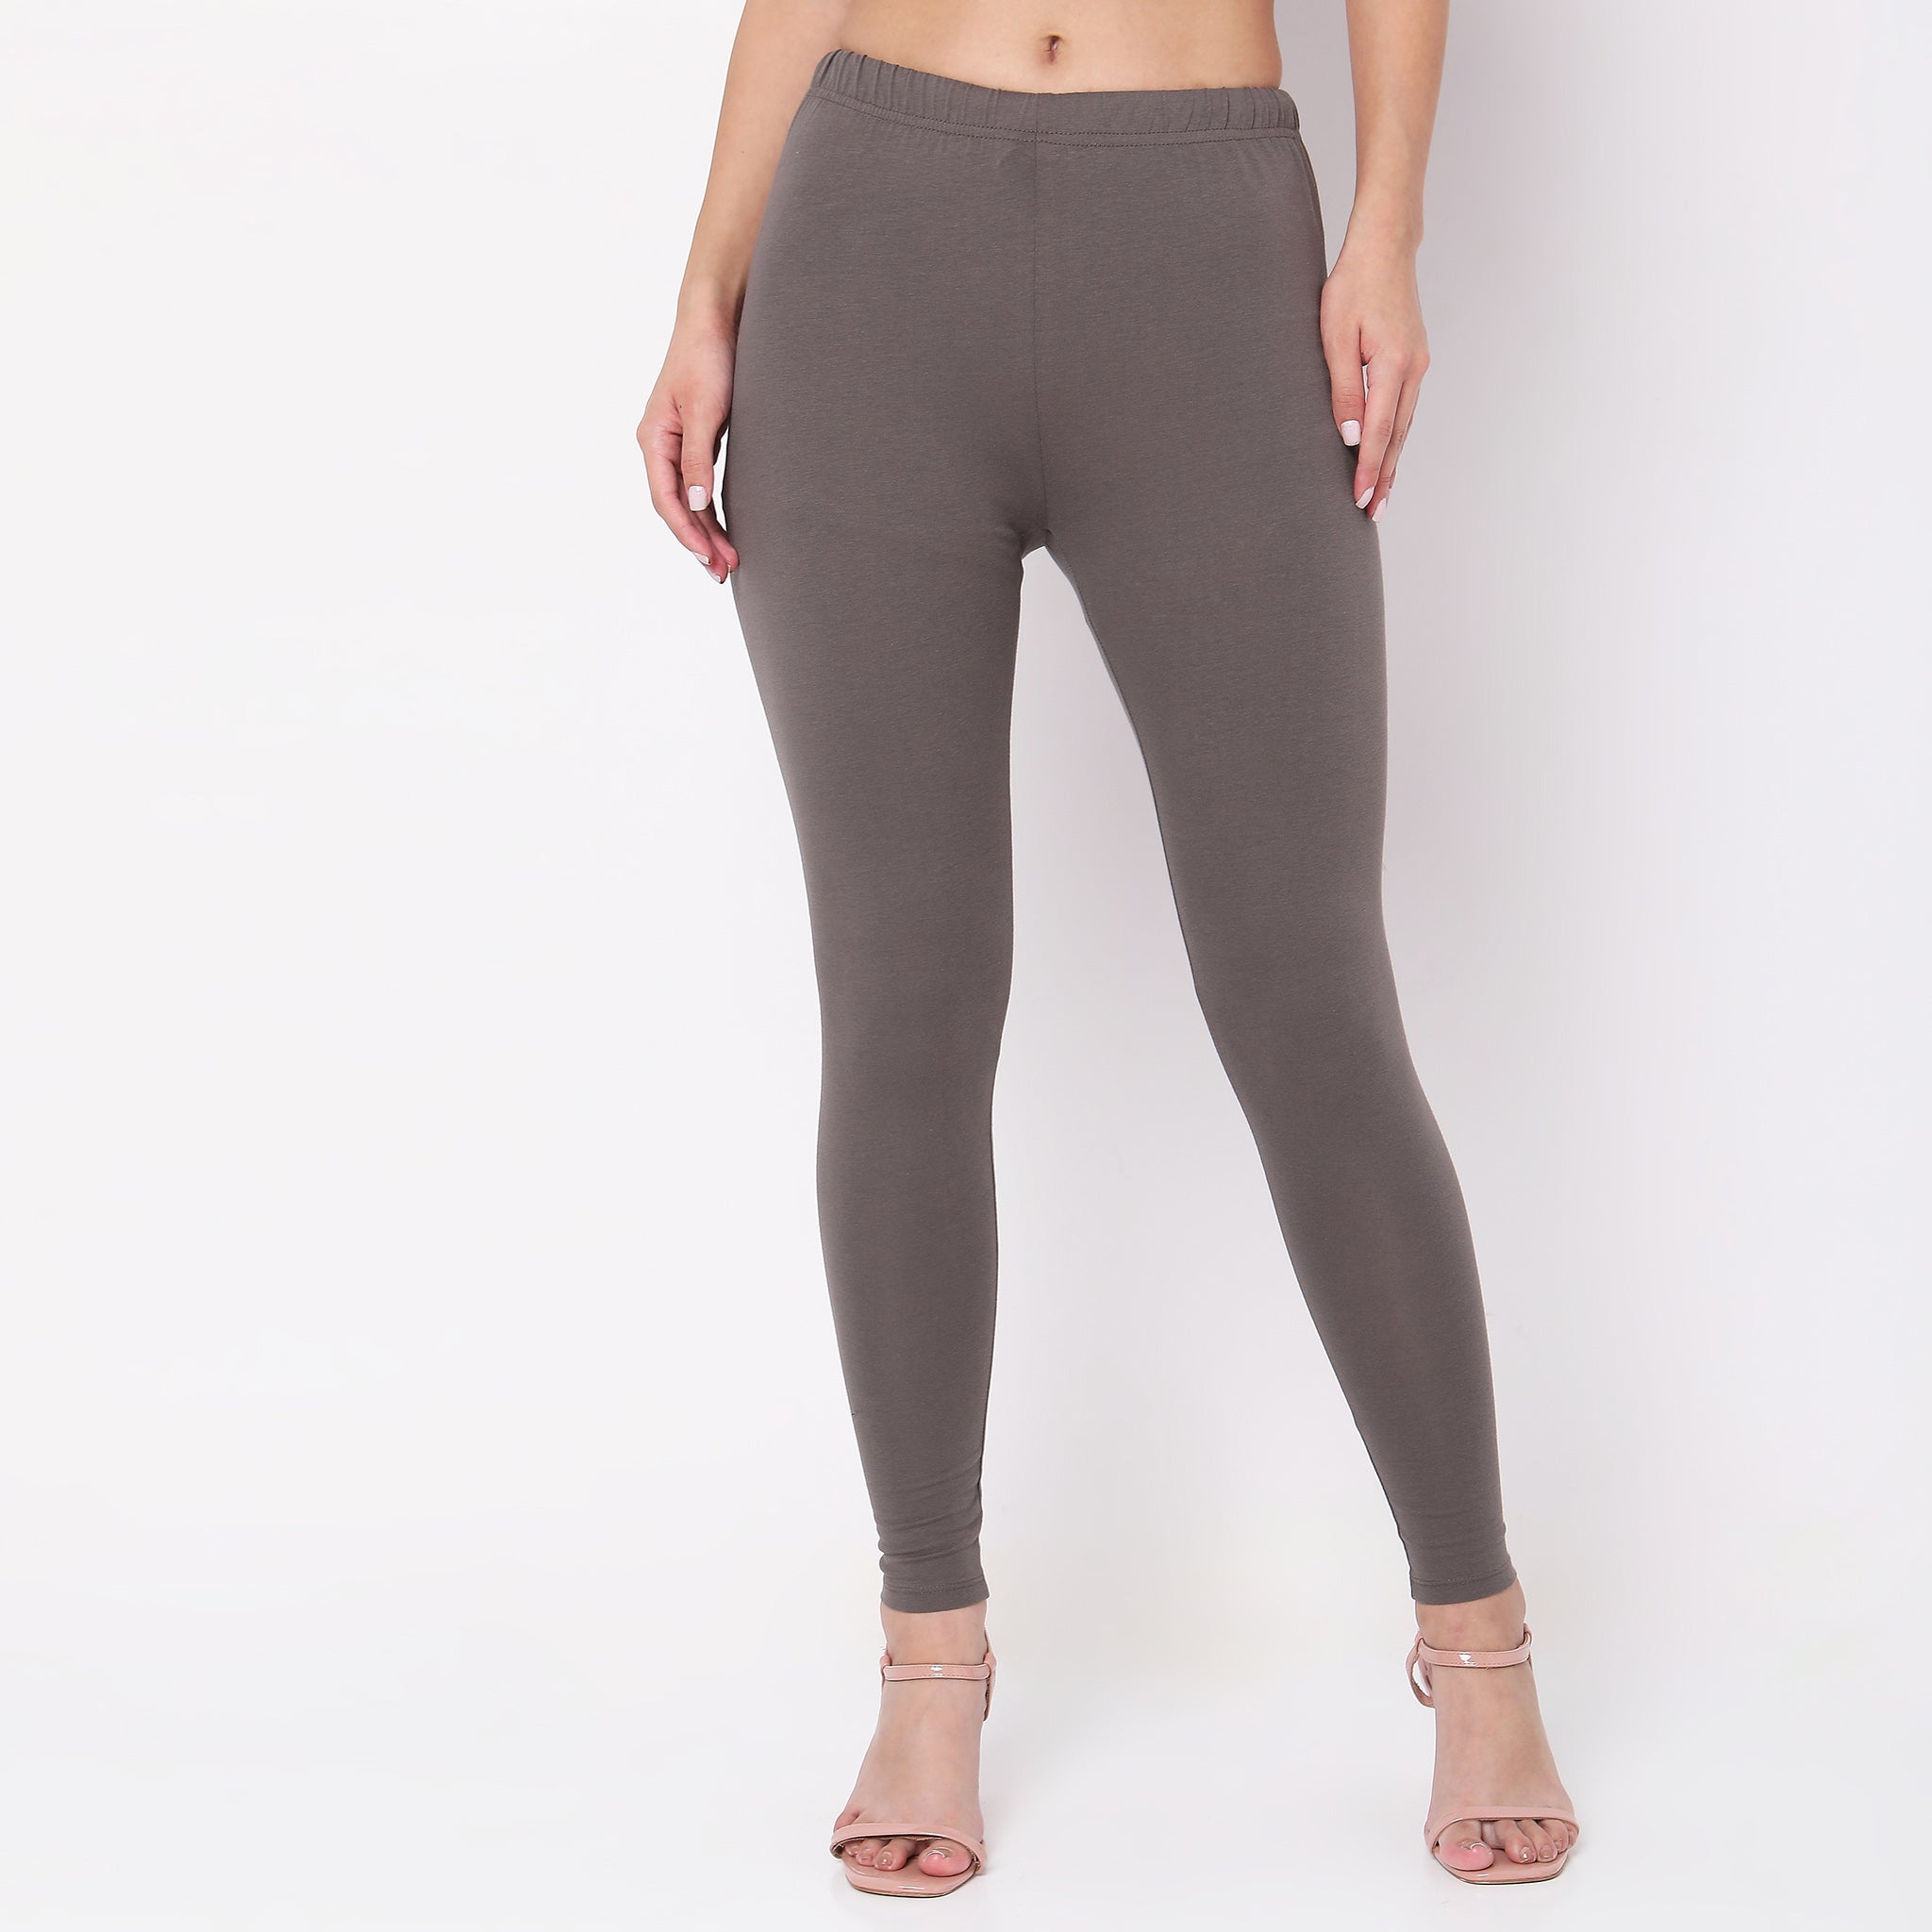 Aesthetic Apparels Straight Fit Ladies Polyester Legging at Rs 260 in Mumbai